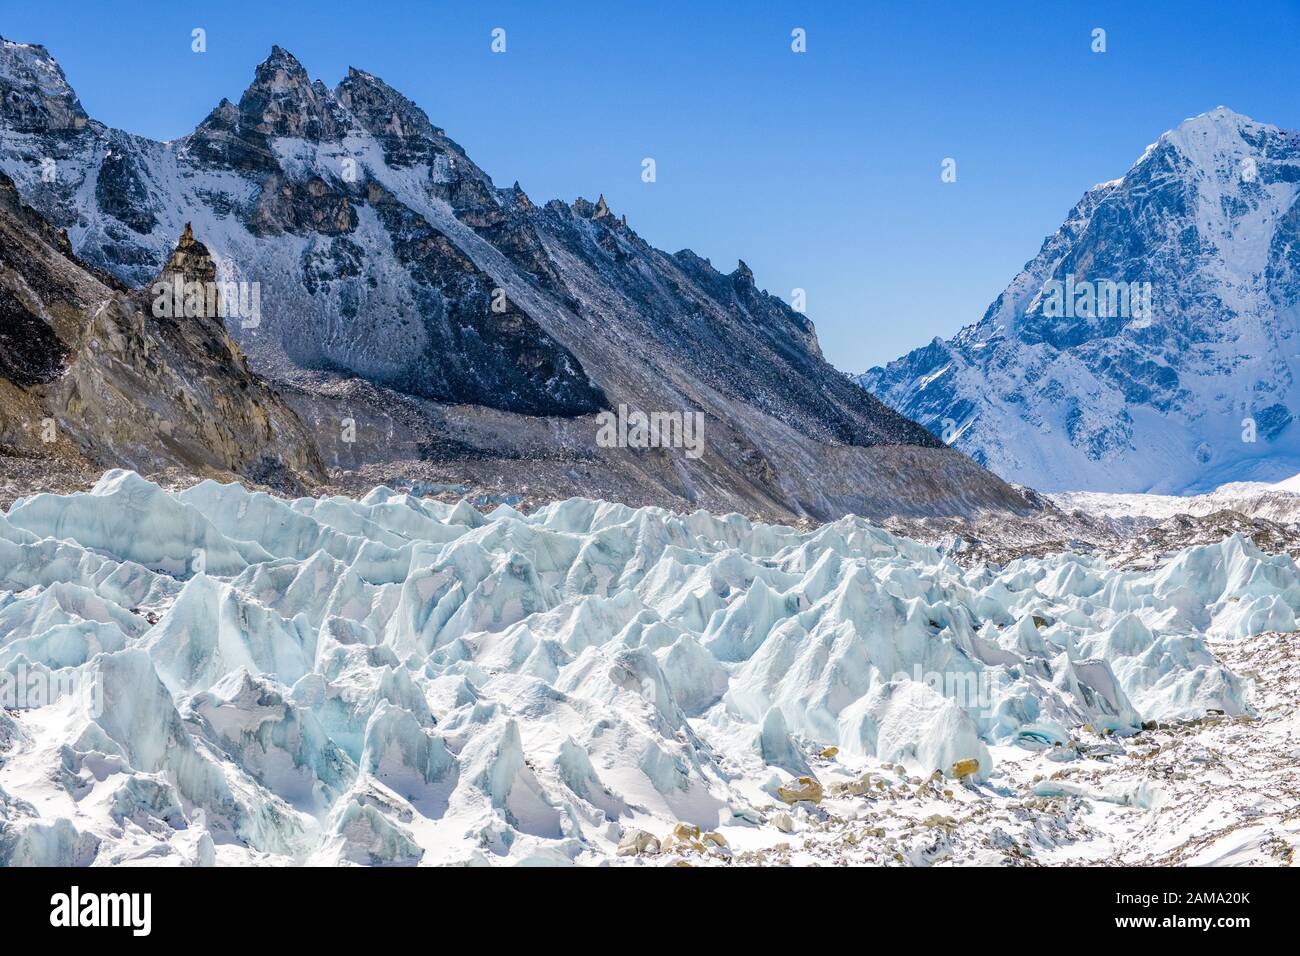 Seracs on The Khumbu Glacier in the Nepal Himalayas, often visited as part of the Everest Base Camp Trek Stock Photo